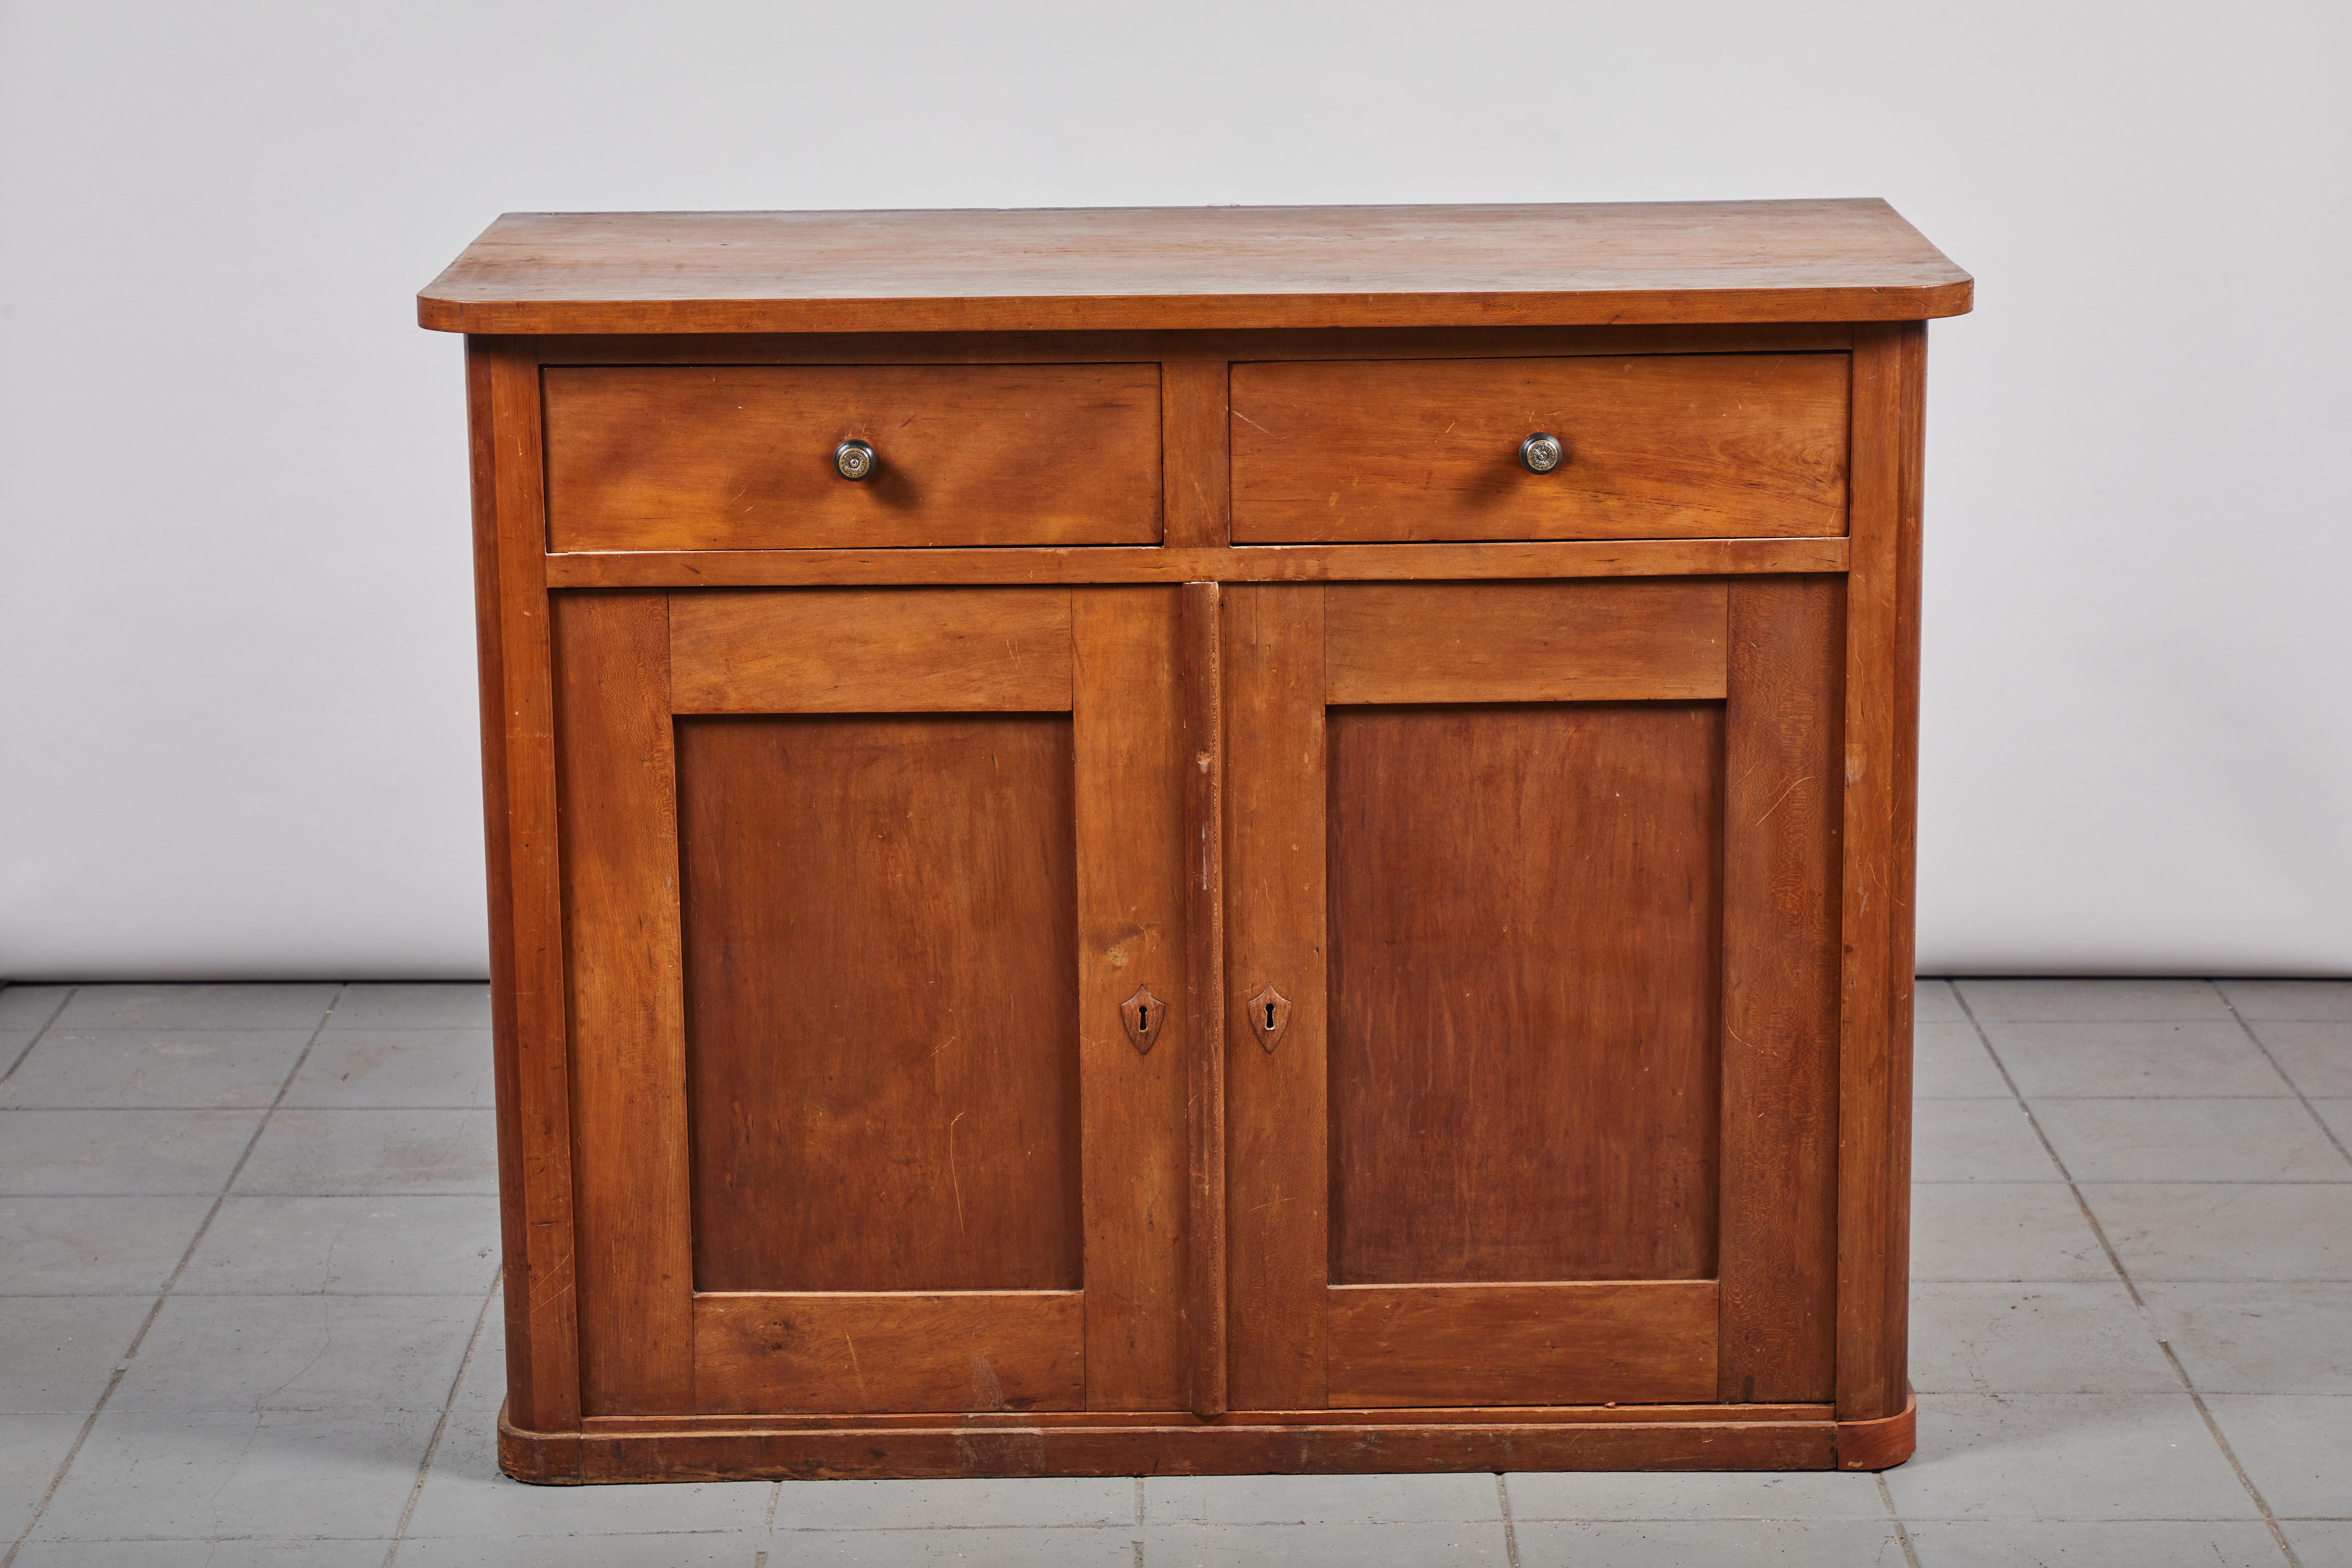 Early American cherry two door two drawer cabinet.